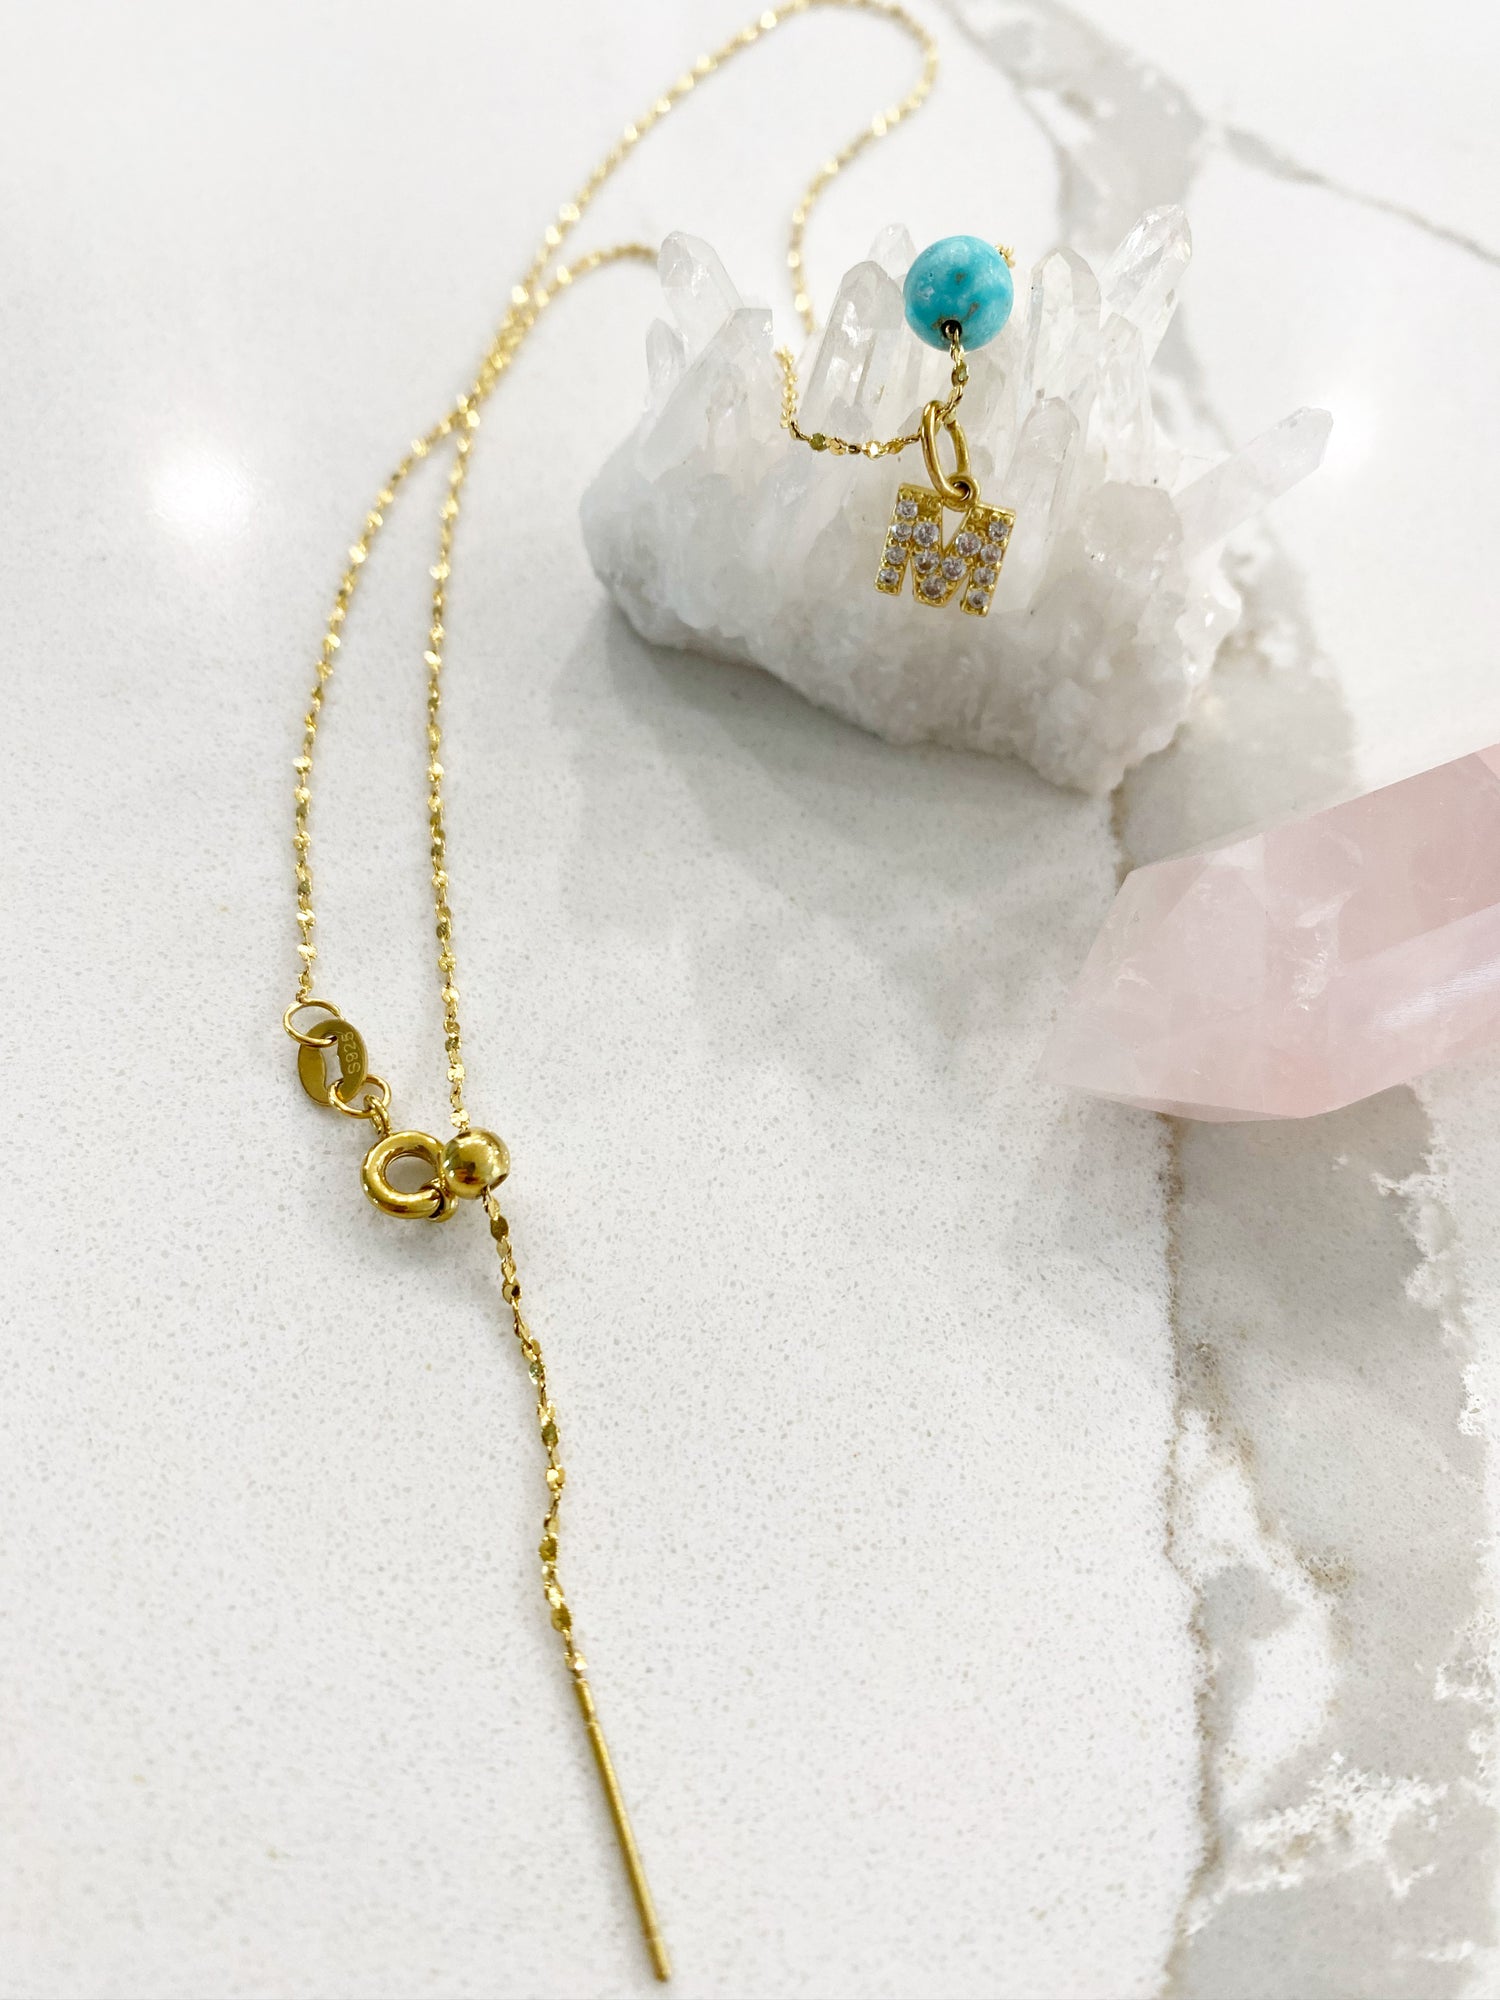 Cubic zirconium Initial necklace with turquoise stone